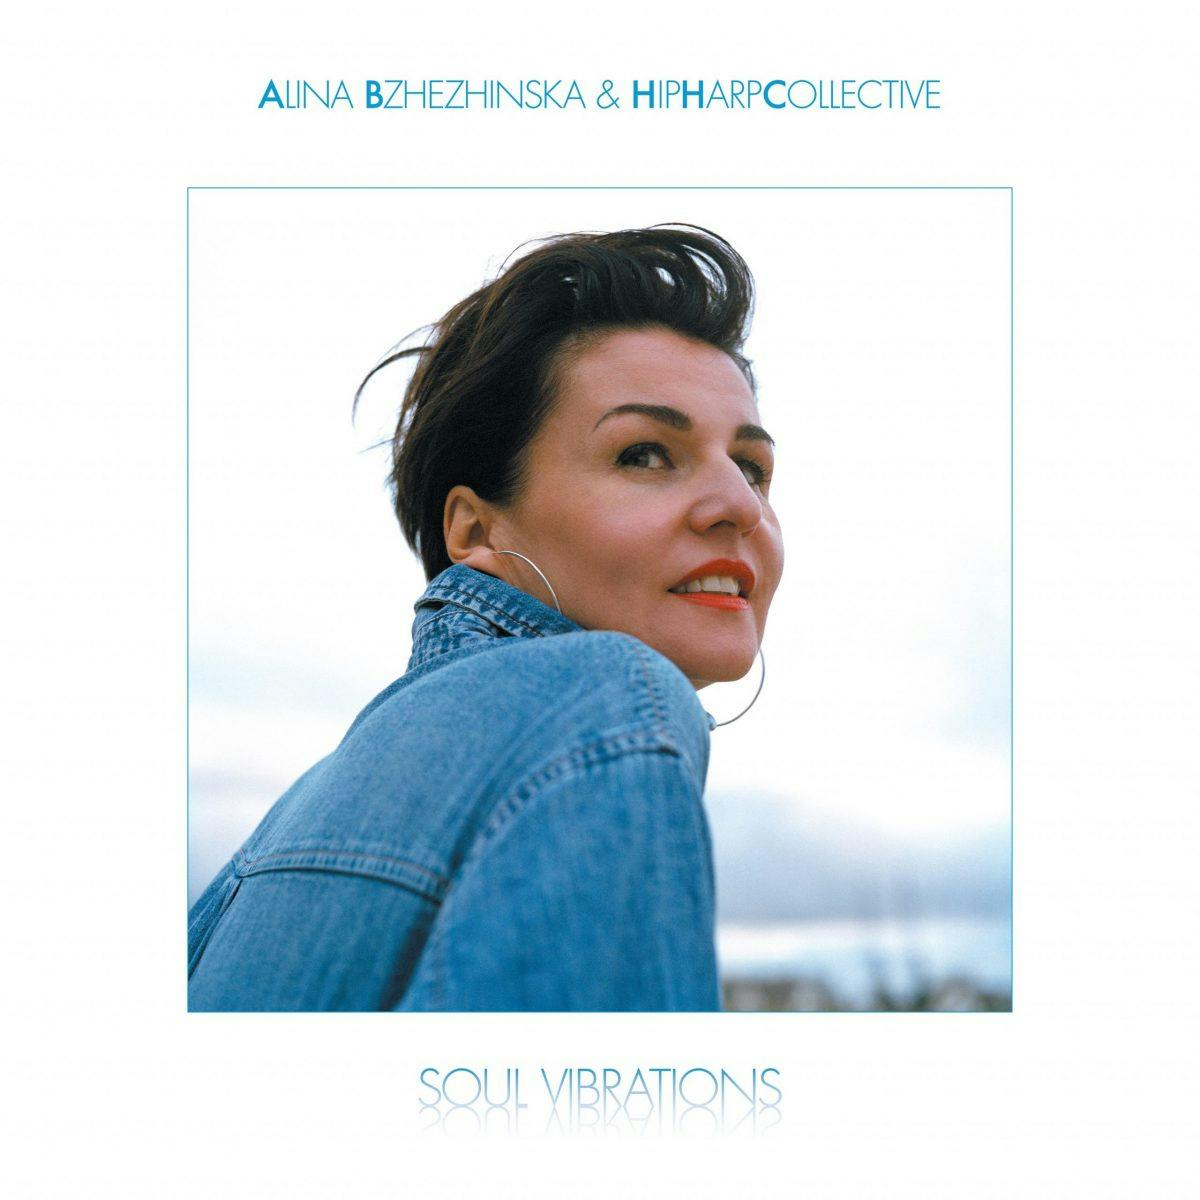 Heralding her forthcoming album ‘Reflections’ on BBE Music, harp player and composer Alina Bzhezhinska (aka AlinaHipHarp) presents ‘Soul Vibrations’, the first single taken from the project.